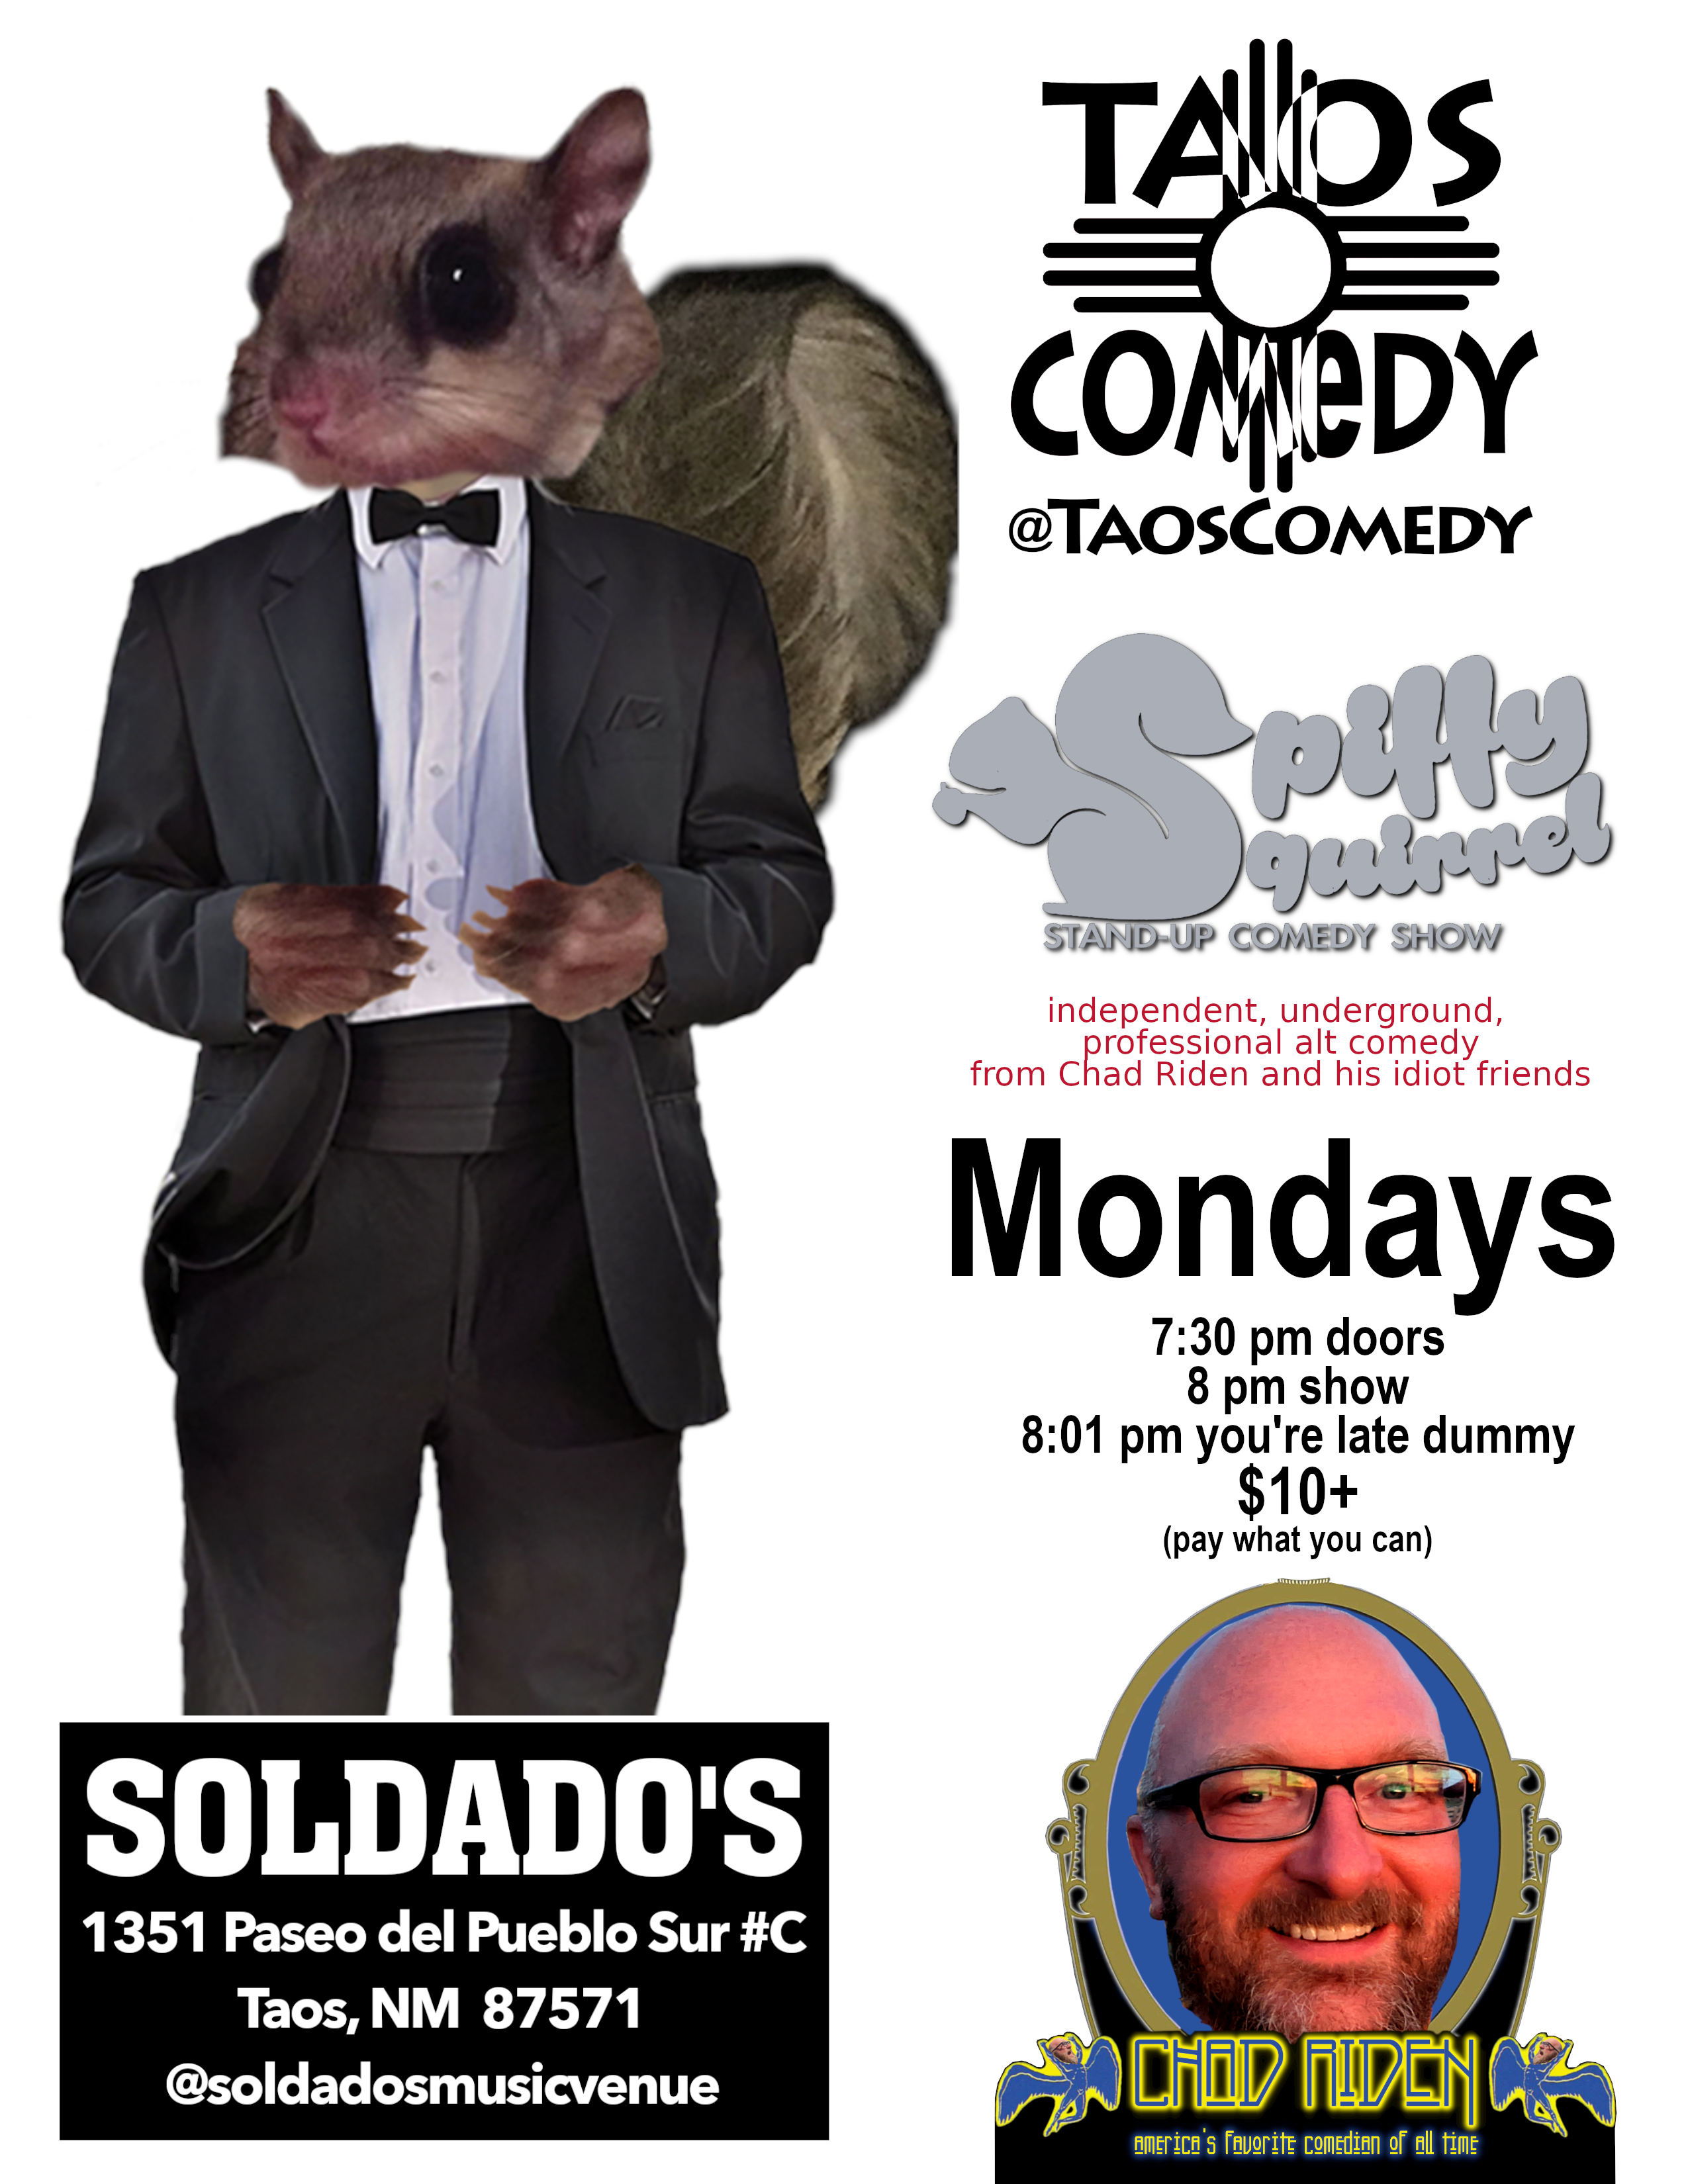 SPiFFY SQUiRREL stand-up comedy showcase 8pm Mondays at Soldados